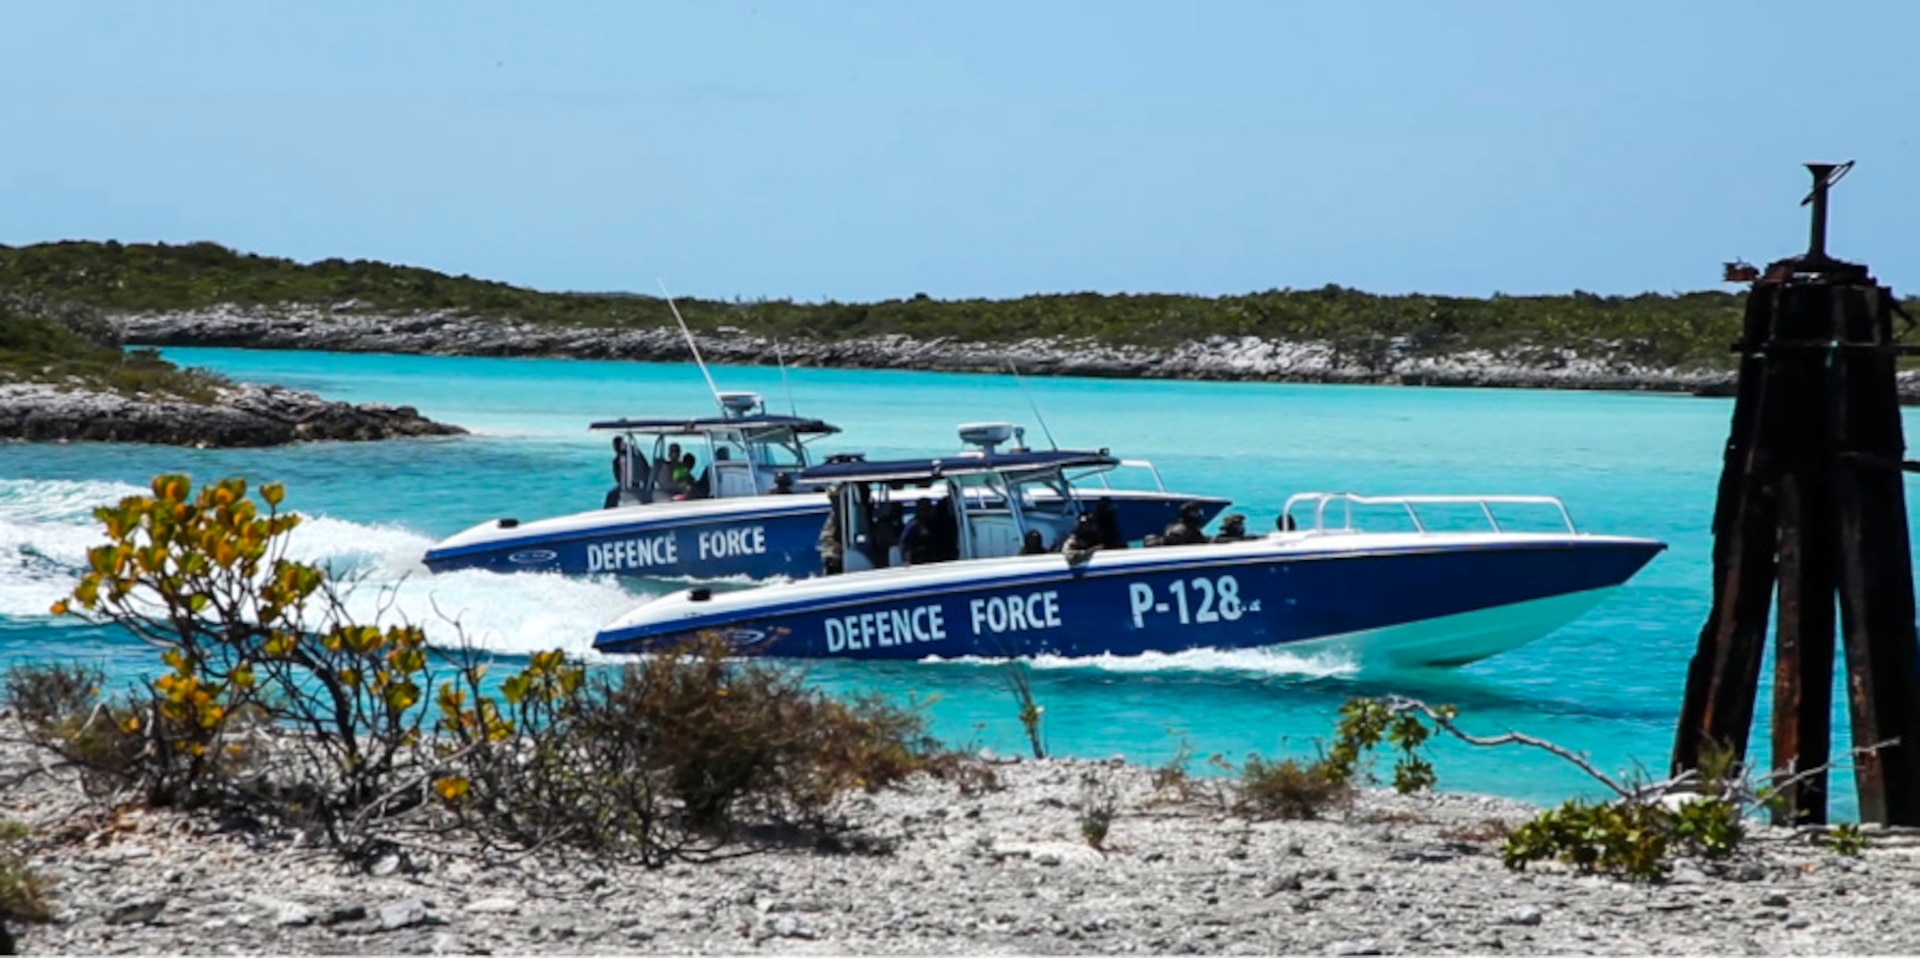 NASSAU, Bahamas (MAY 10, 2016) Members of the Royal Bahamas Defence Force exit a patrol boat during a simulated assault for Exercise Marlin Shield May 10, 2016.  Marlin Shield aims to promote interoperability between the RBDF, U.S. Northern Command and U.S. Special Operations Command North and allows both nations to practice combating terrorism and illicit trafficking in the Caribbean region.